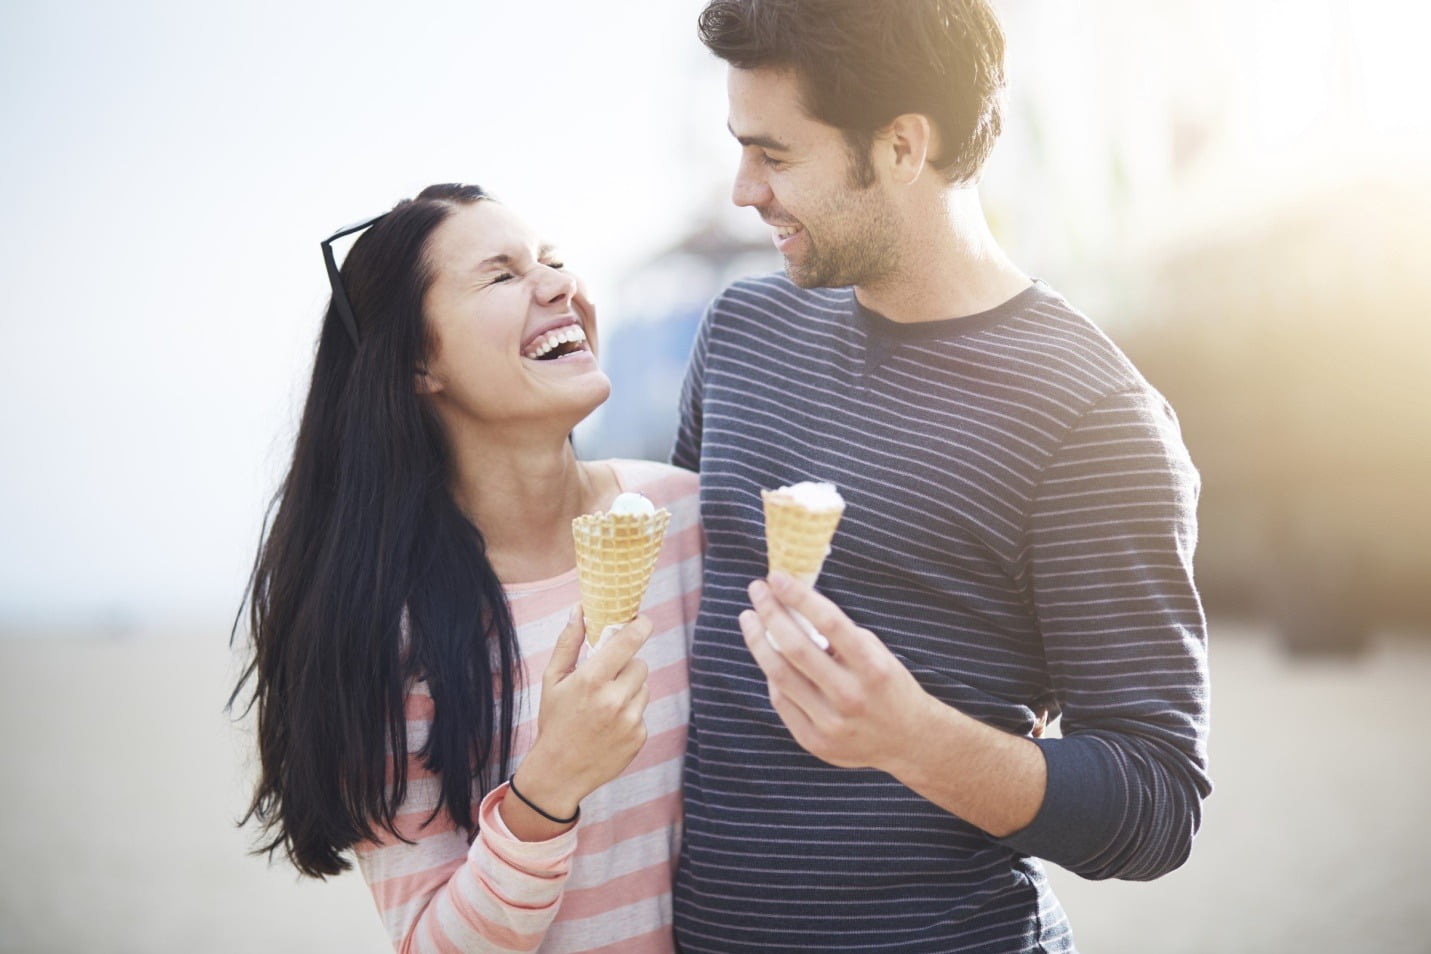 couple dating in first 3 months sharing ice cream